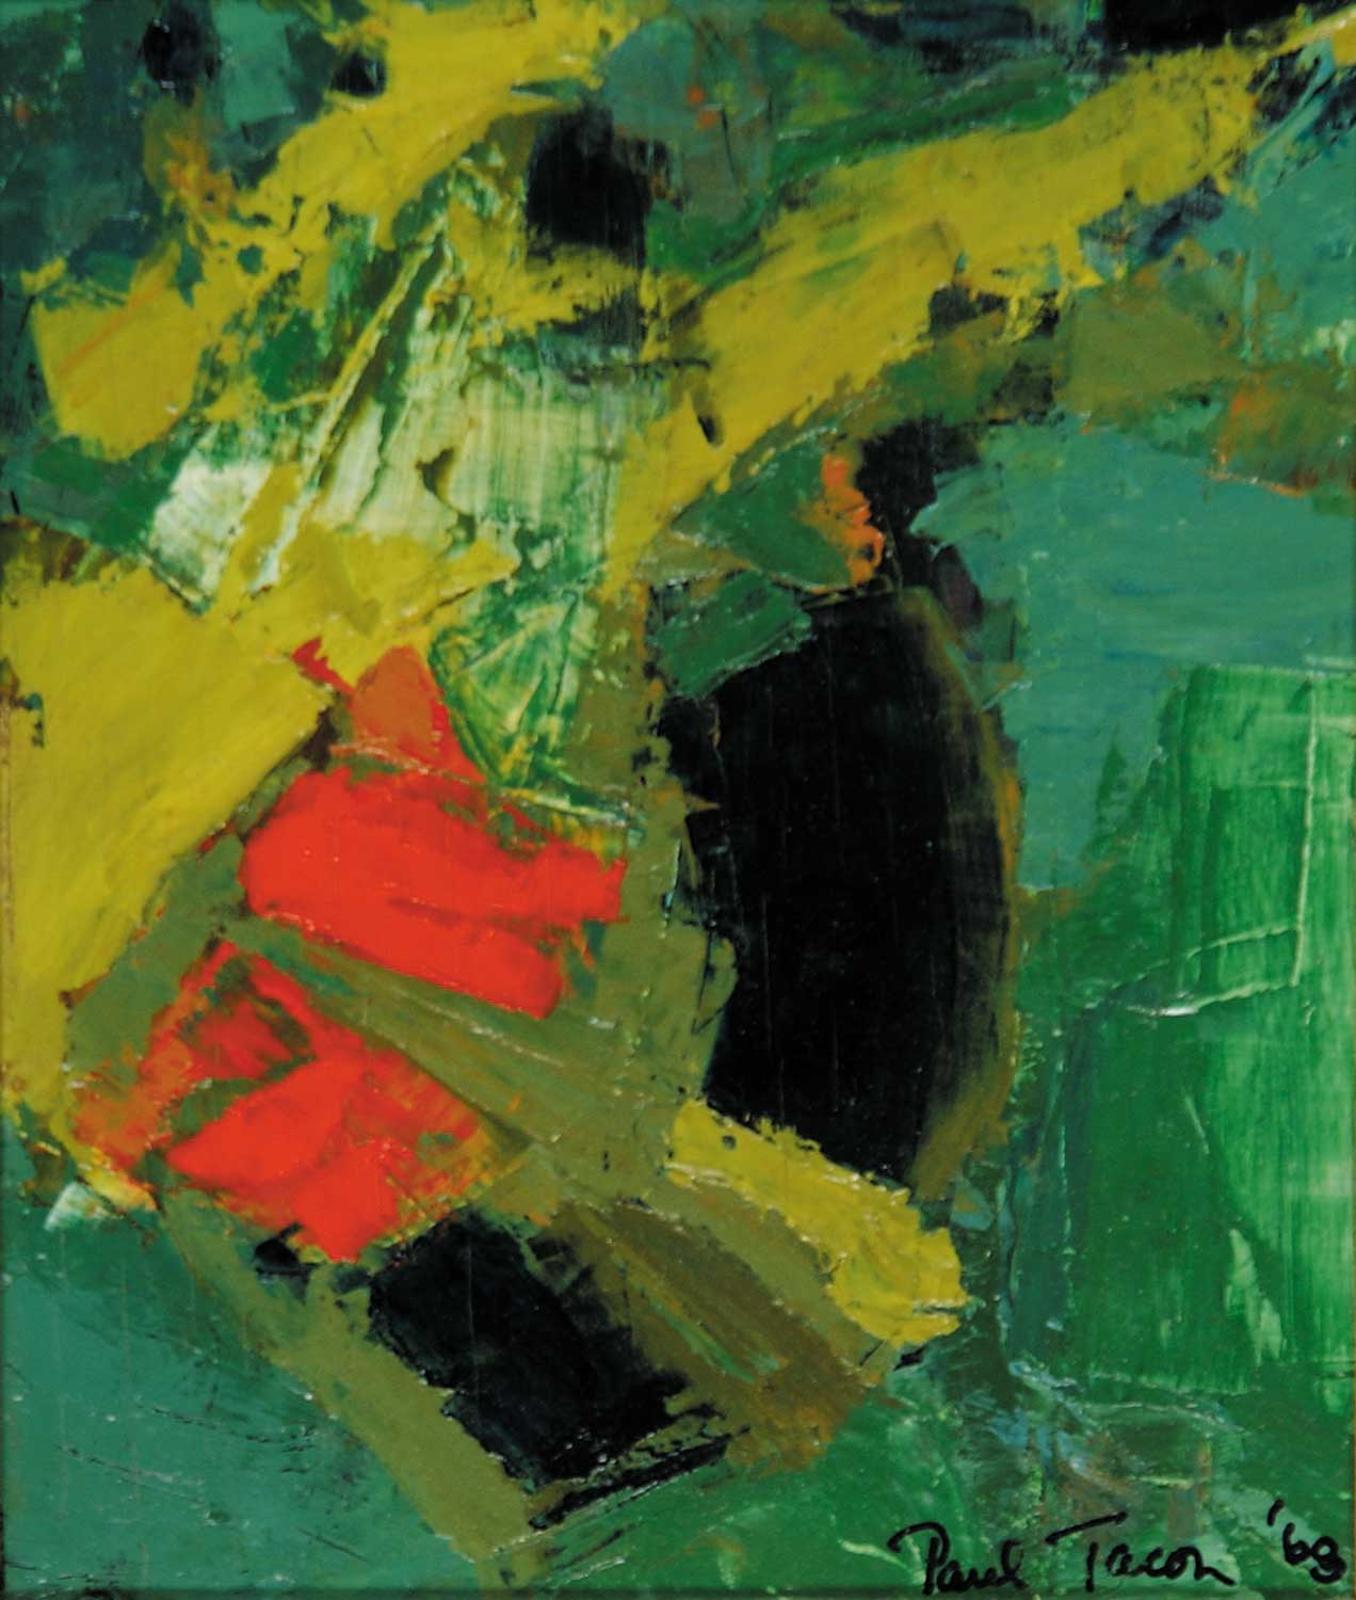 Paul Tacon - Composition in Green and Orange